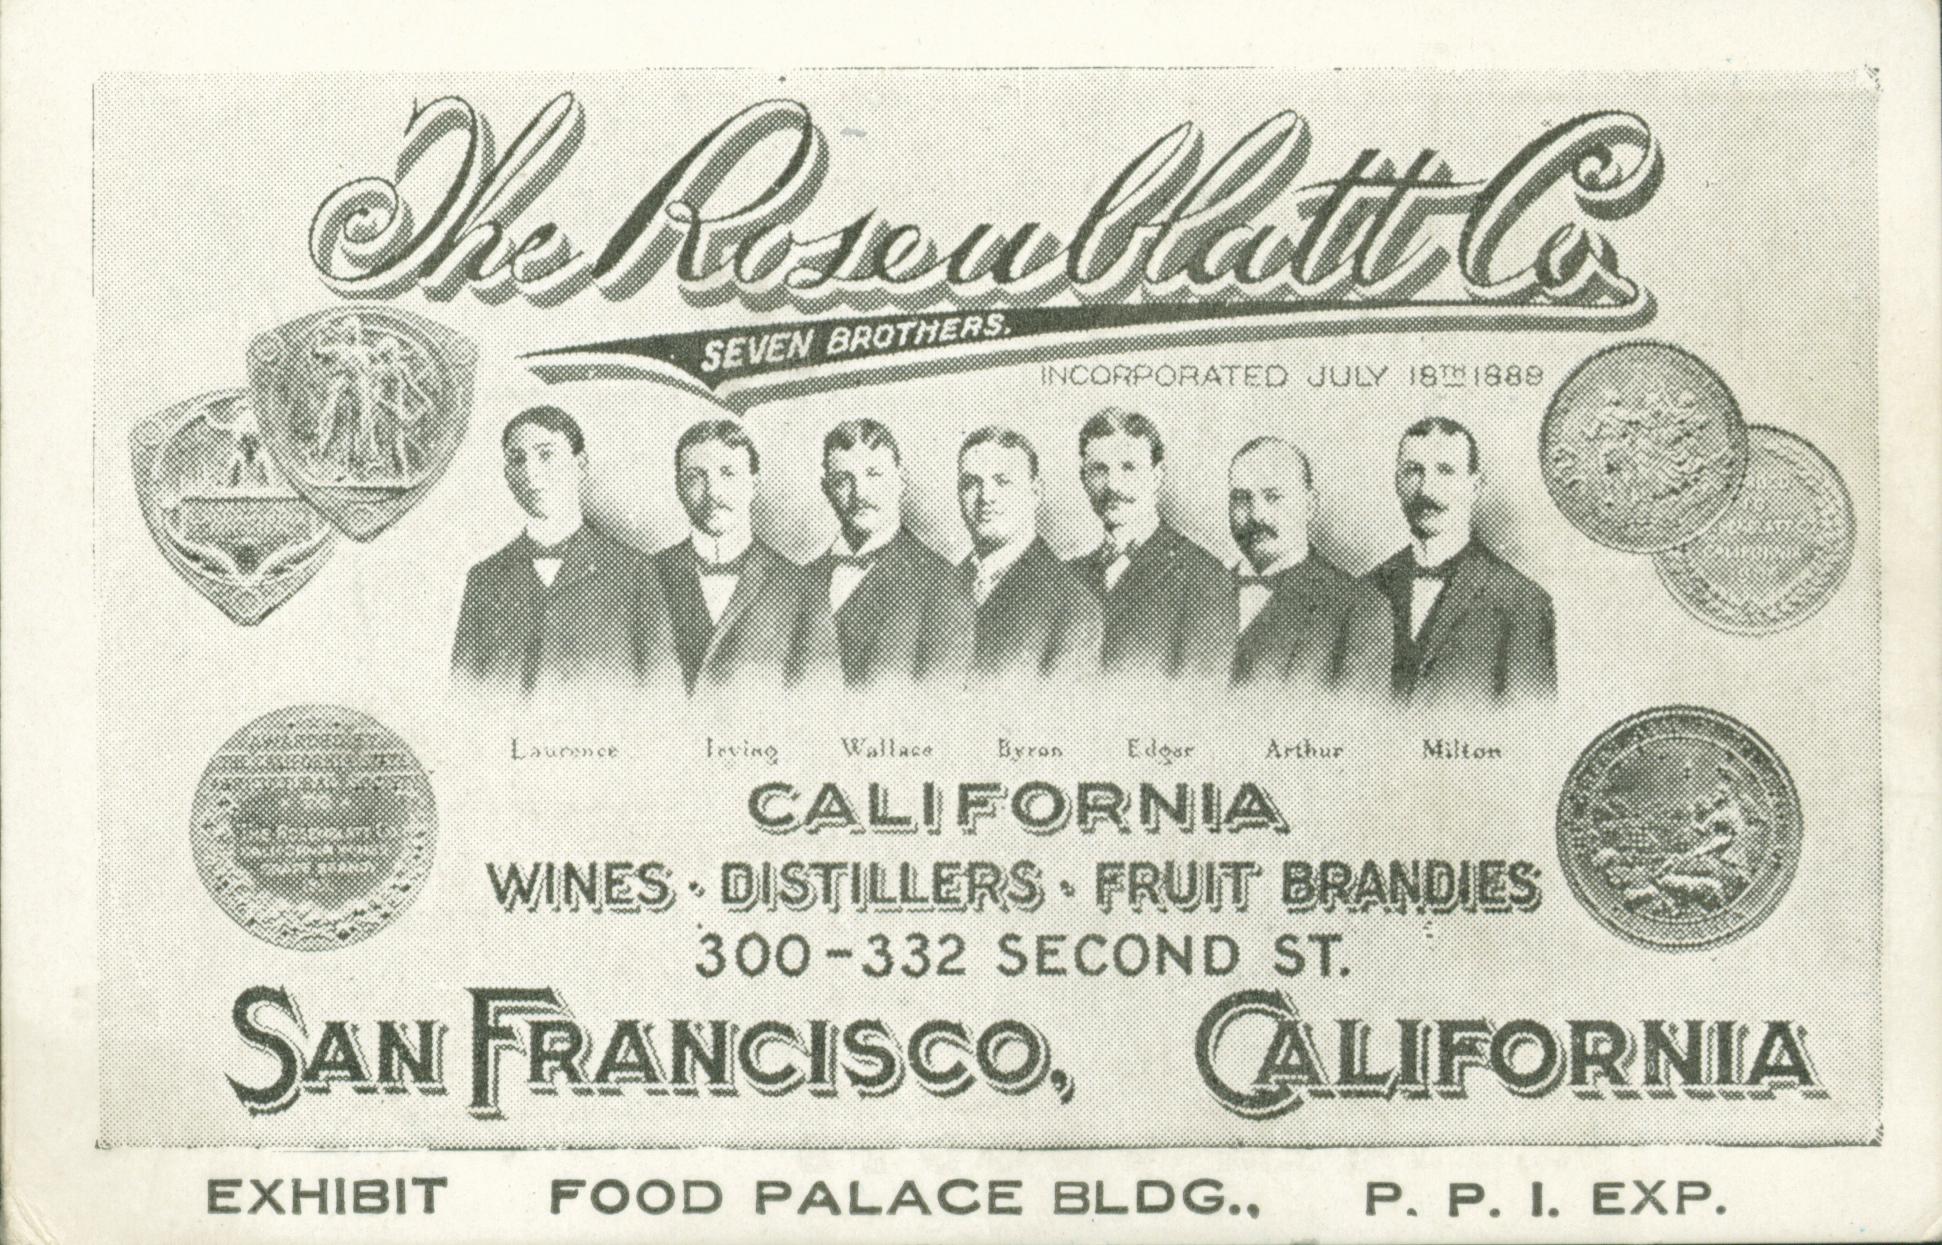 This card shows a portrait of the seven Rosenblatt brothers along with information about the beverages they sell. There is a small street map on the back.